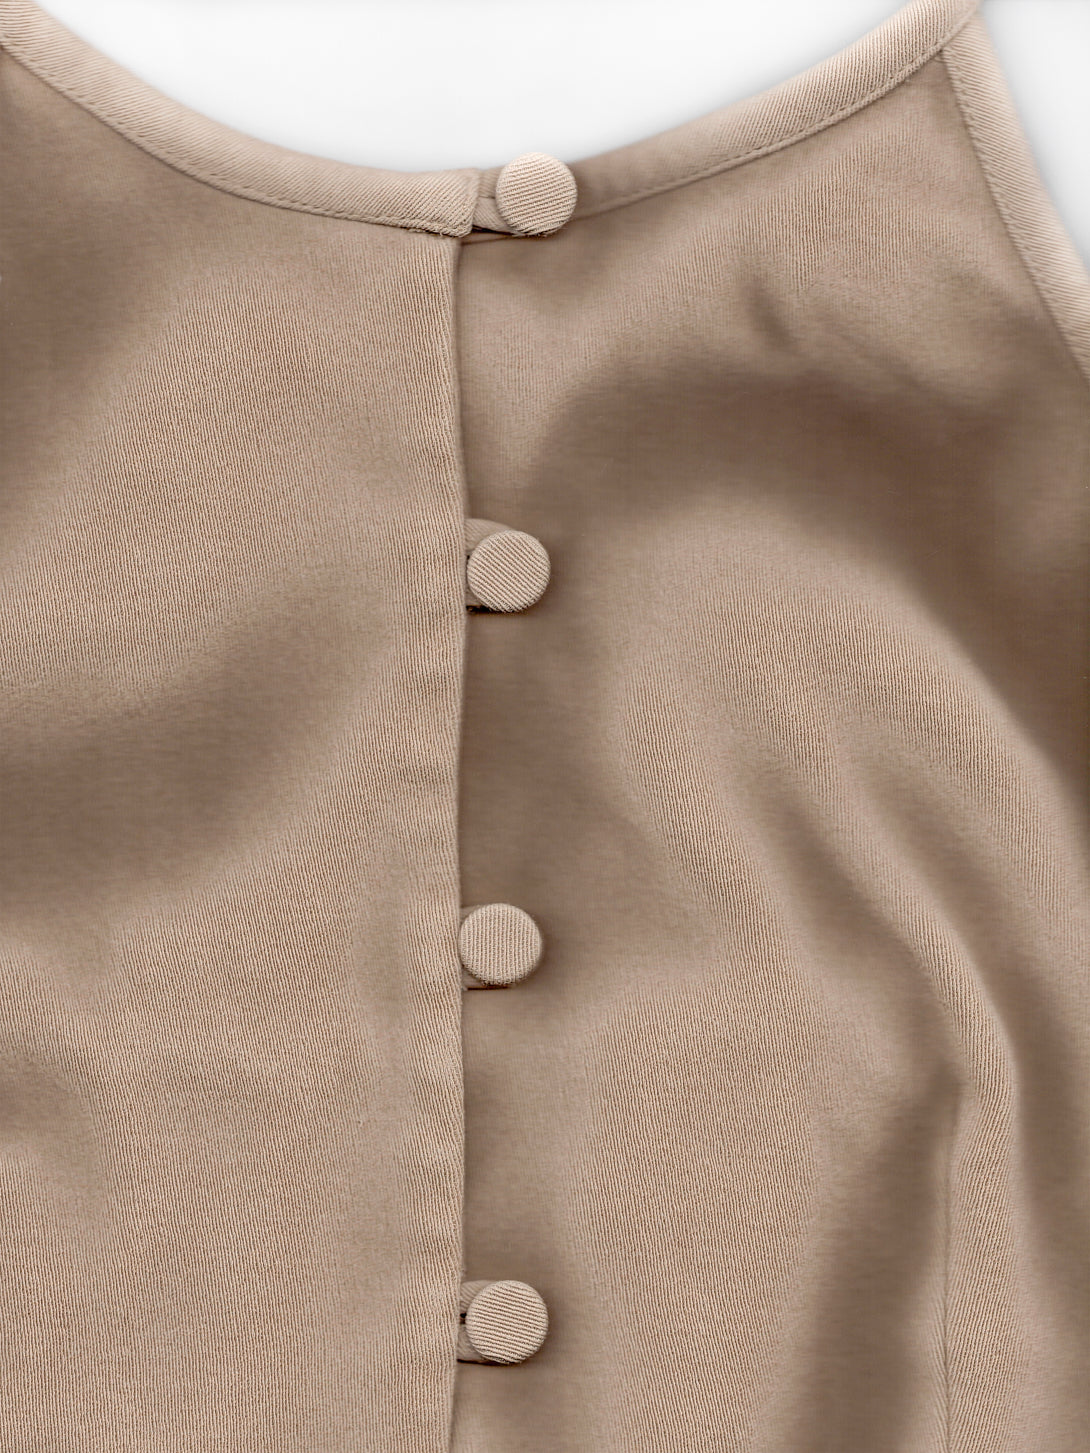 Armani Buttoned Top